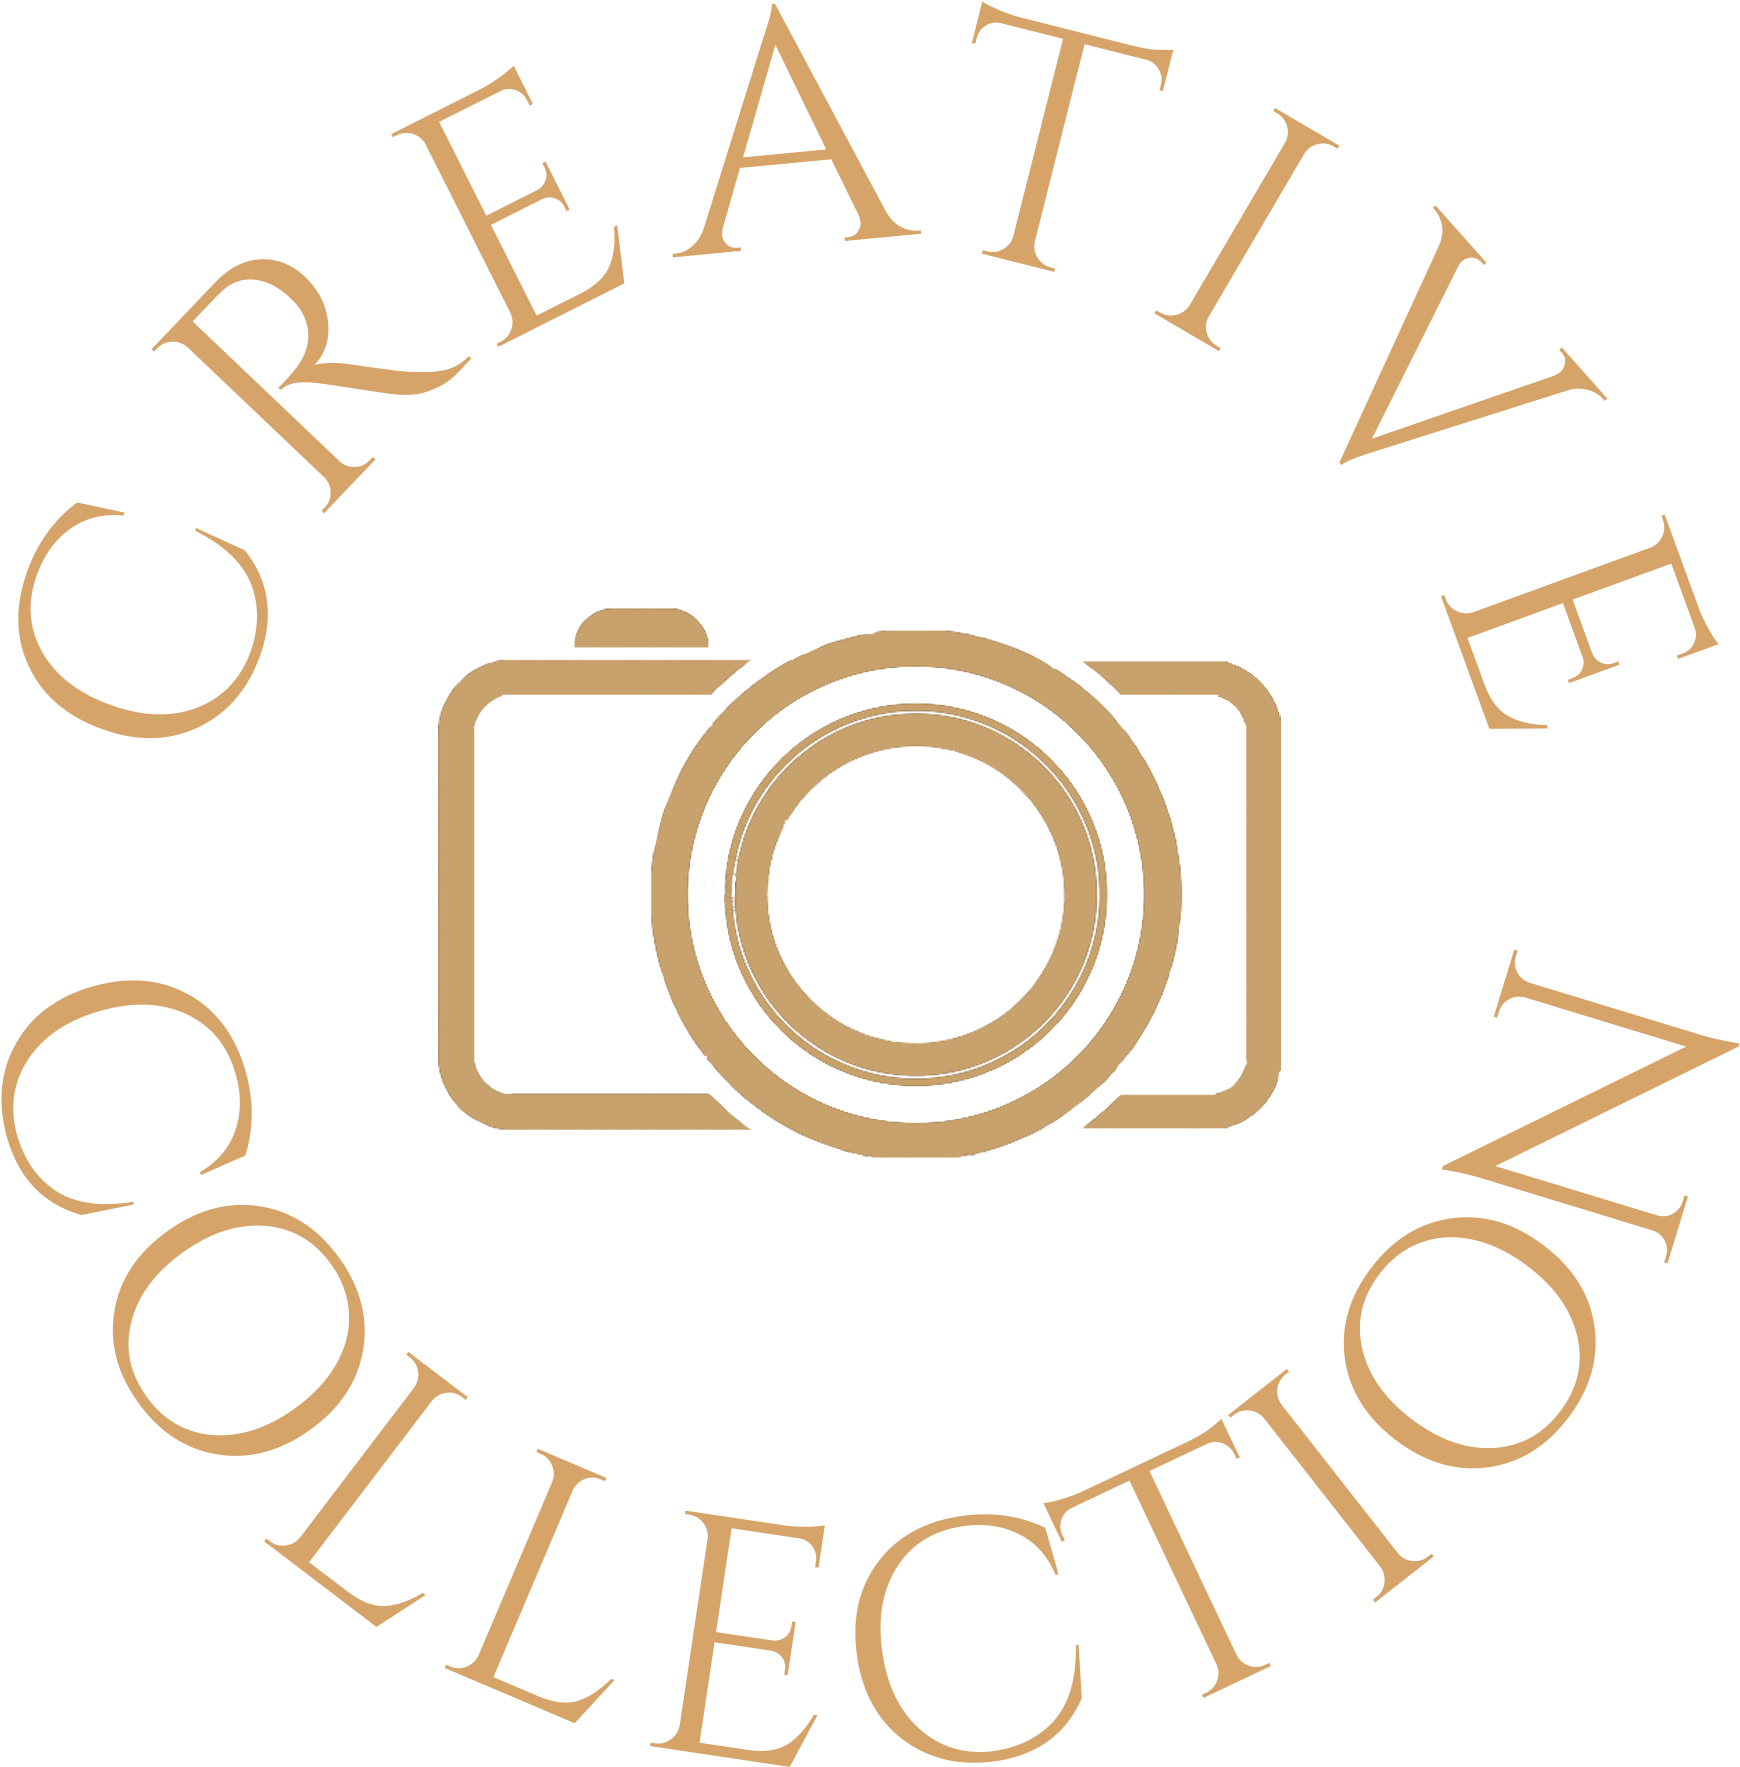 Coaid лого. E logo collections. Creating collection. New collection картинки. Creative collection